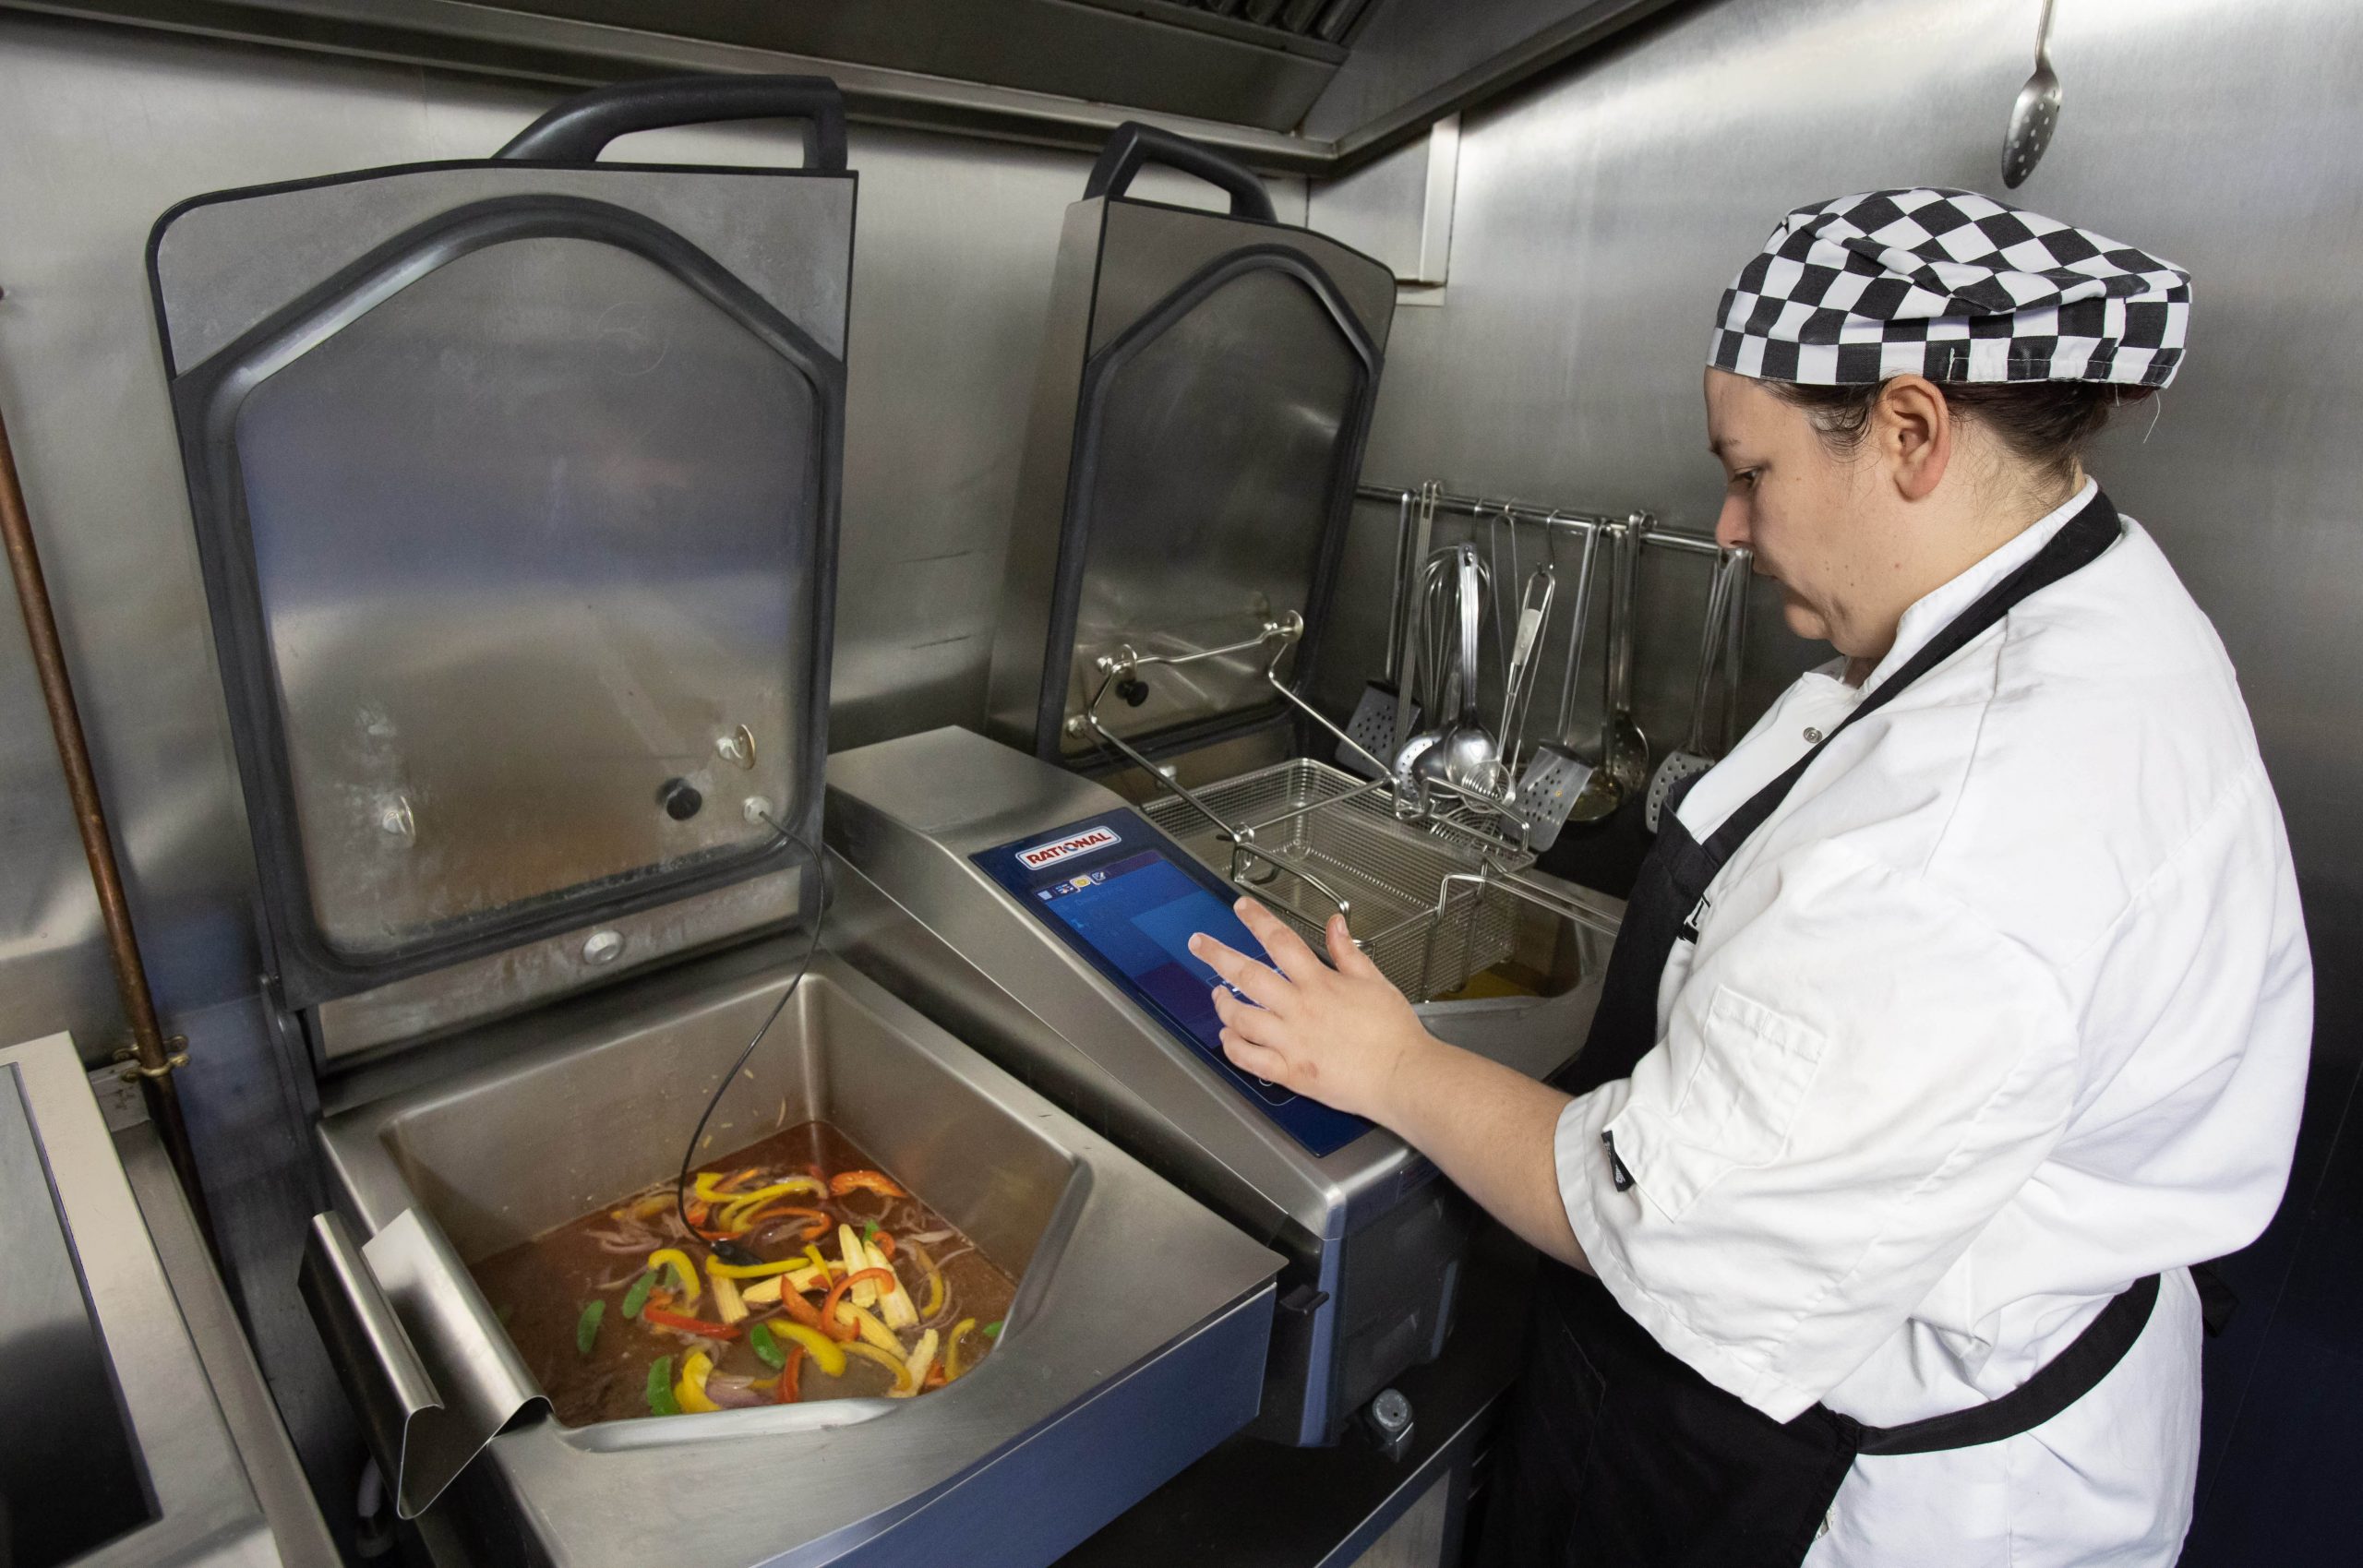 Volunteer Inn raises the bar with new cooking system technology